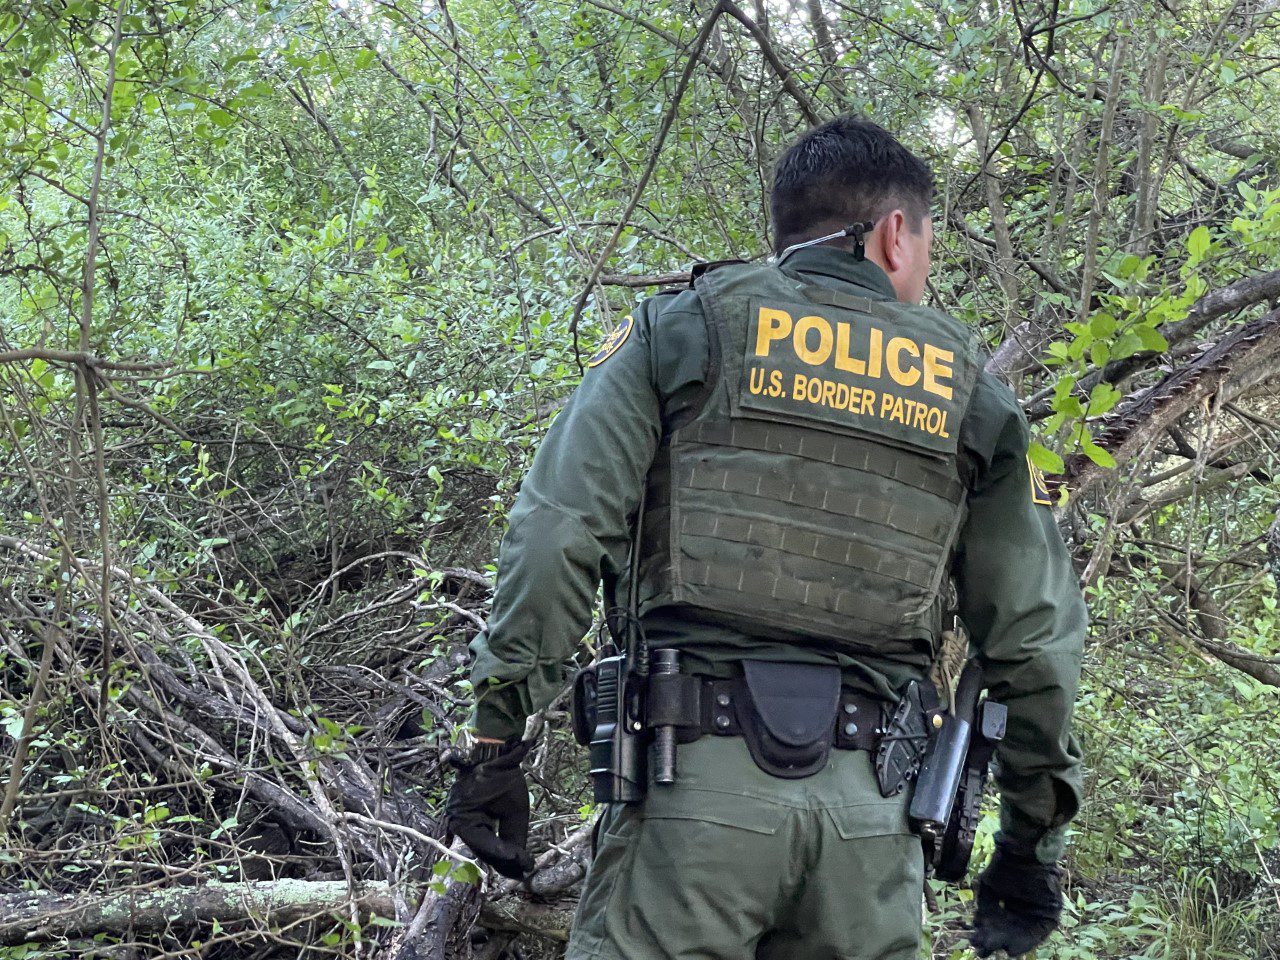 2021 was a Busy Year for Border Patrol